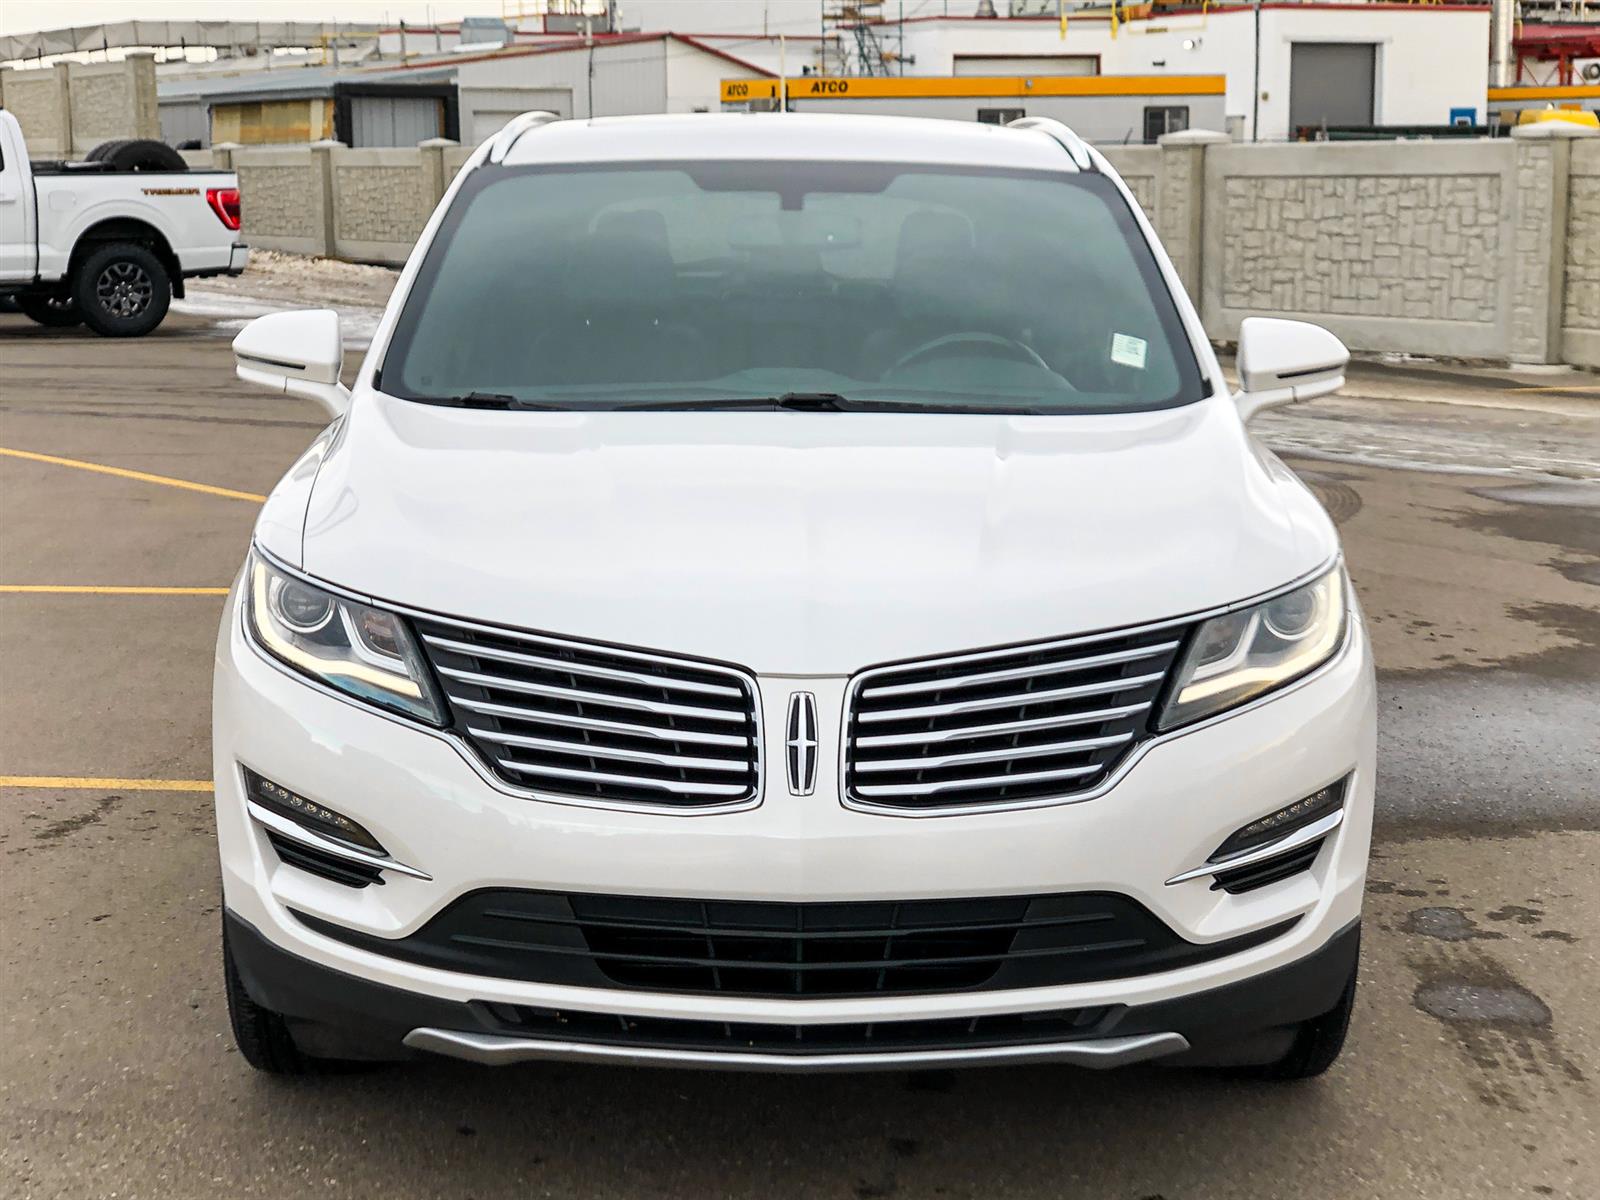 2015 Lincoln MKC 2.0L I4 ECOBOOST | AWD | HEATED FRONT SEATS | NAV | PANORAMIC RO